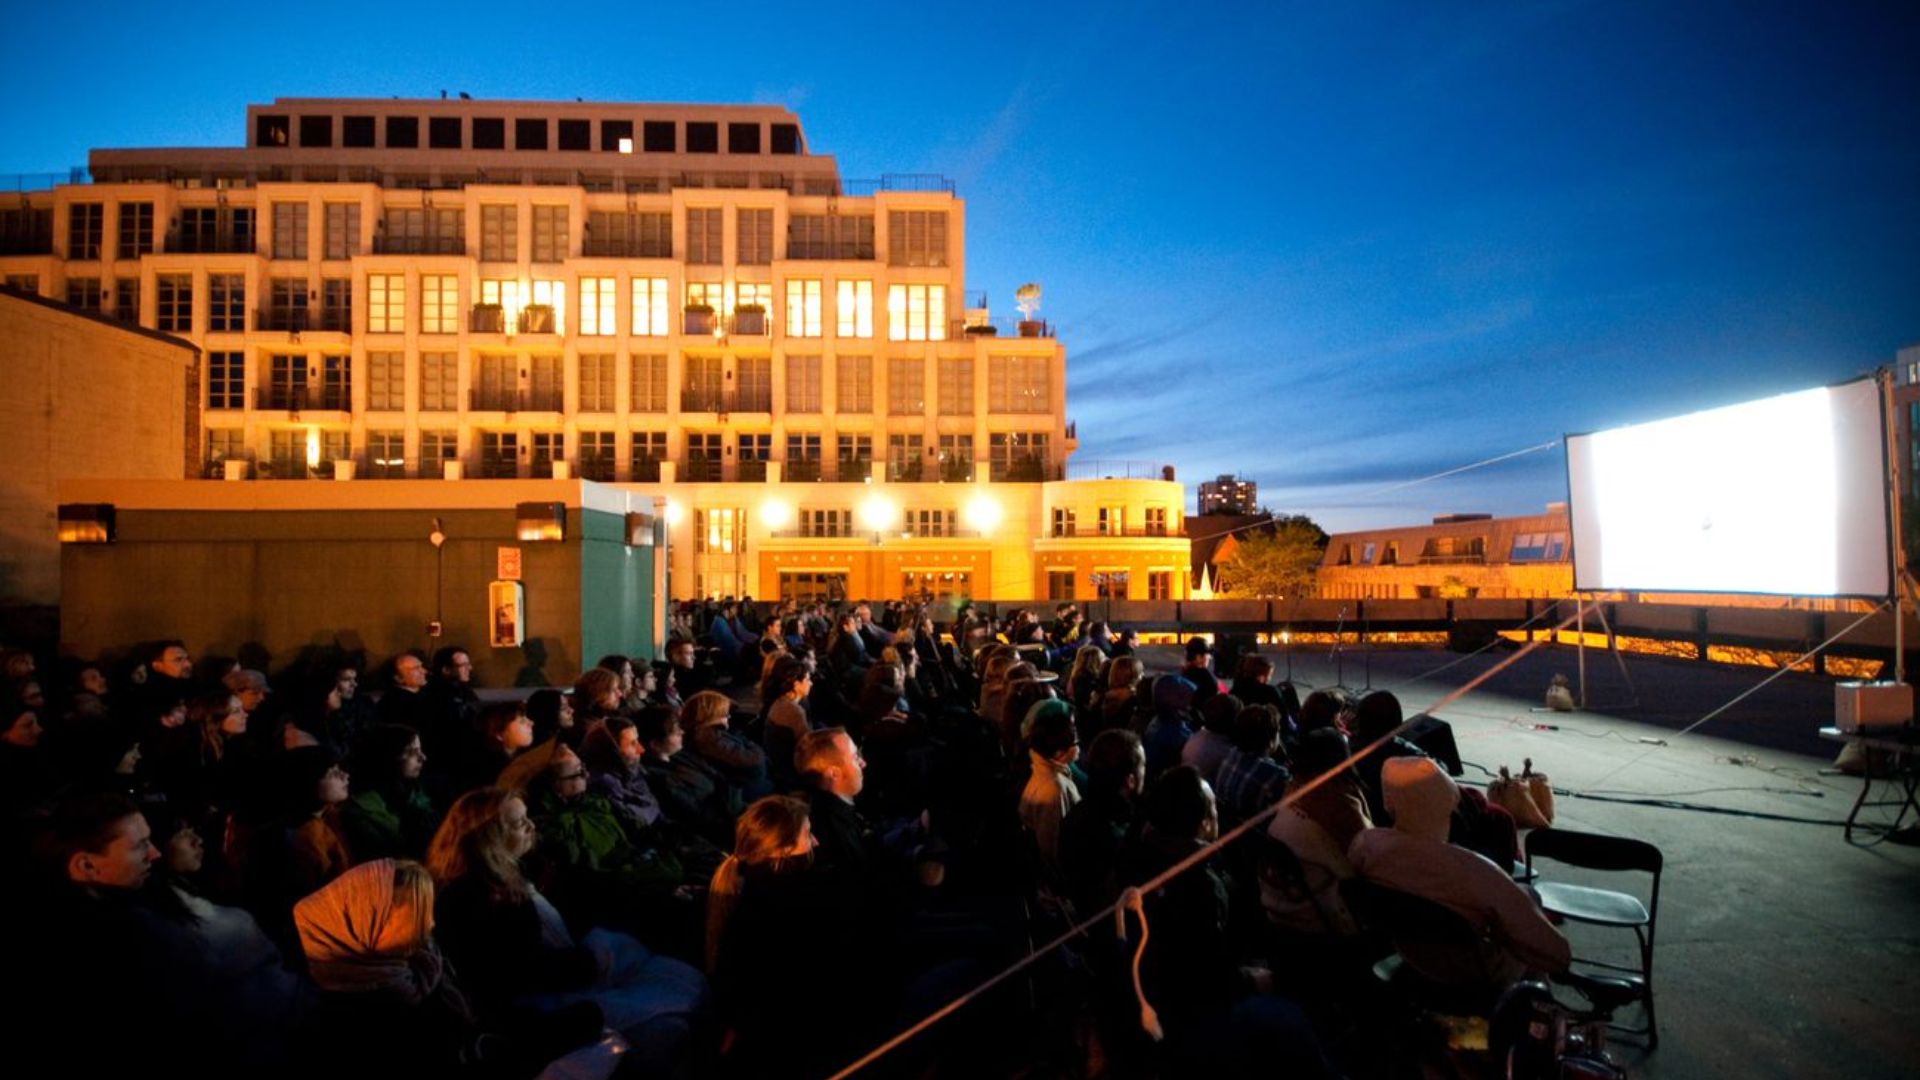 Outdoor film screening with a full audience on a building rooftop at dusk.